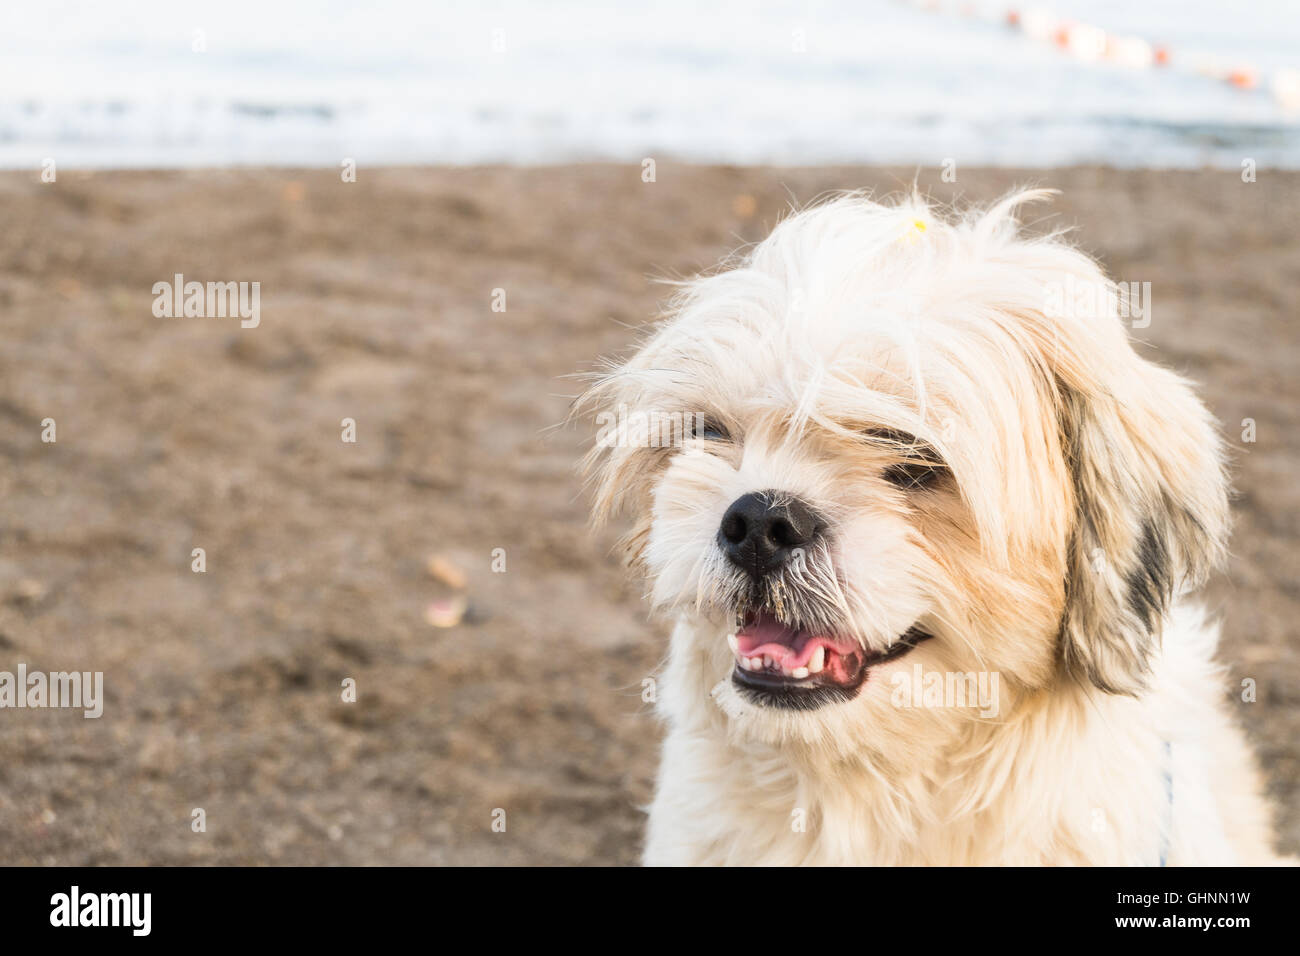 Portrait of a white dog on a beach Stock Photo